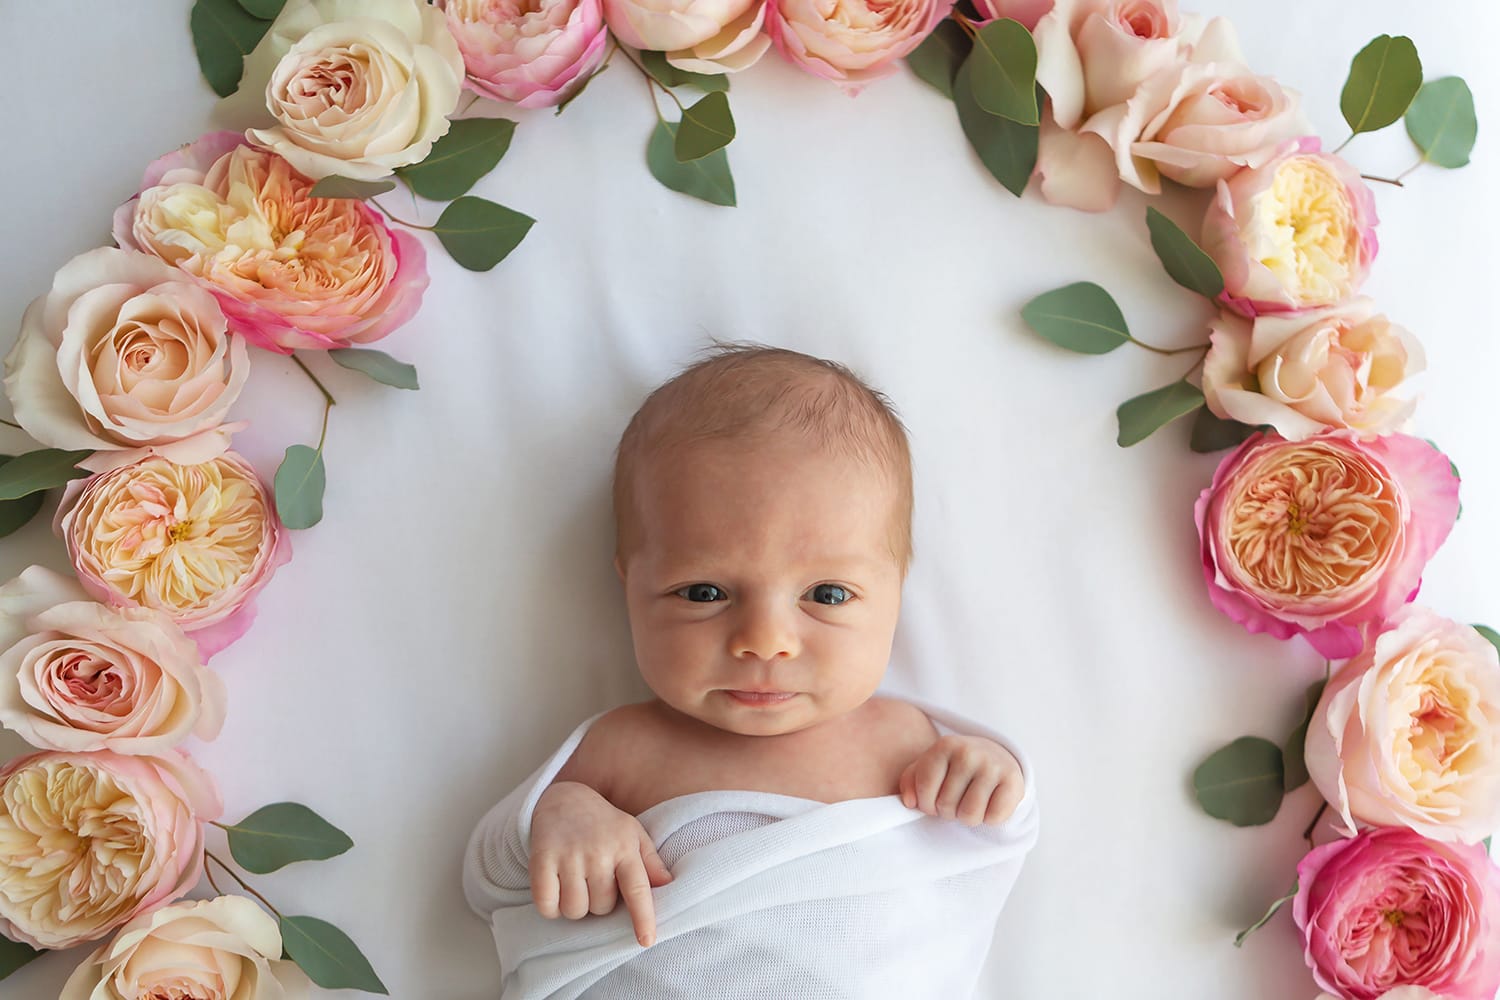 Baby Photoshoot Inspiration for Florists